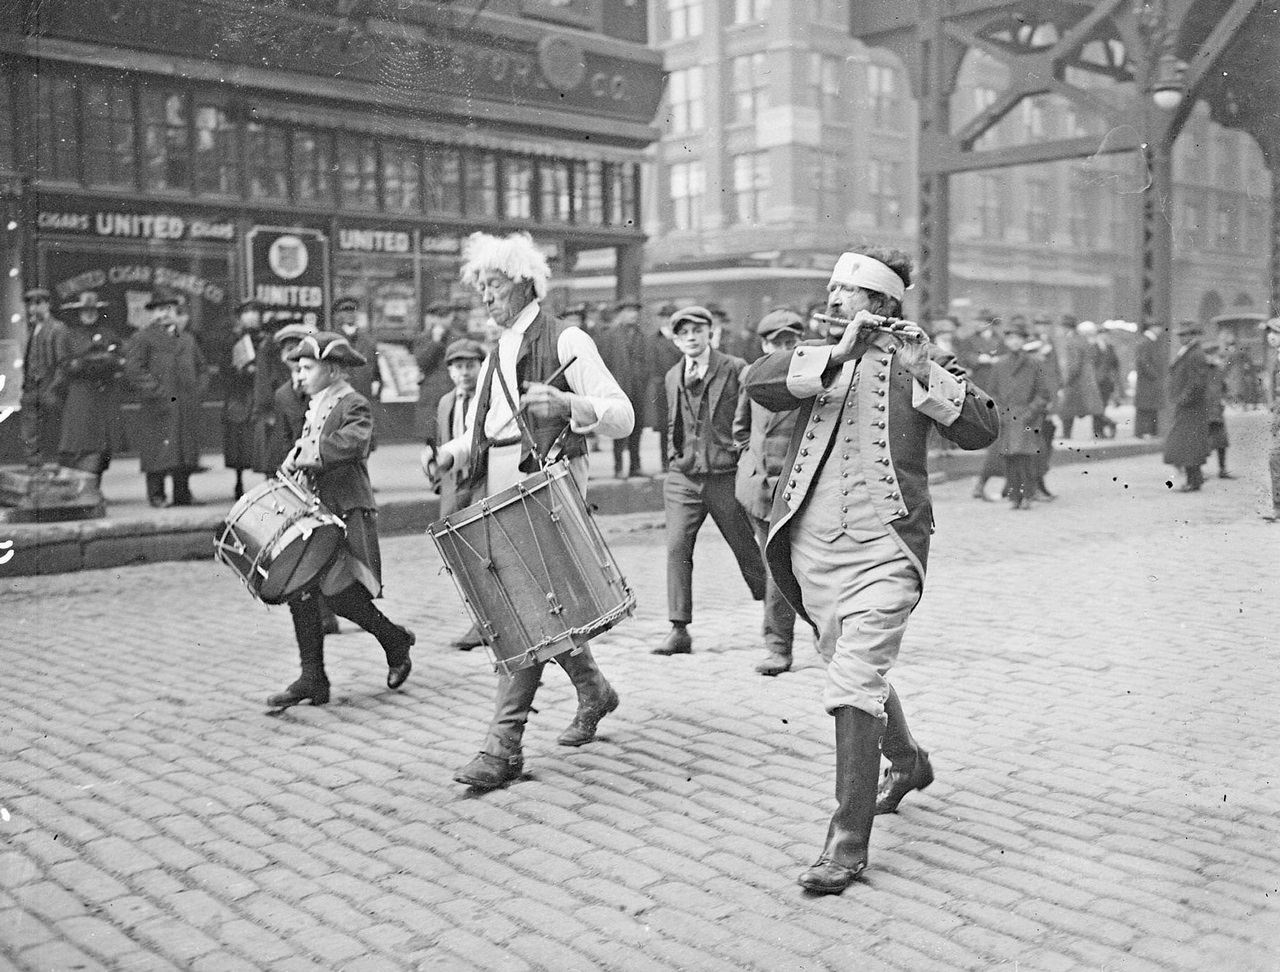 Men dressed in Colonial costumes, marching south and playing drums and a fife on Market Street in the Loop community area, Chicago, Illinois, 1910s.